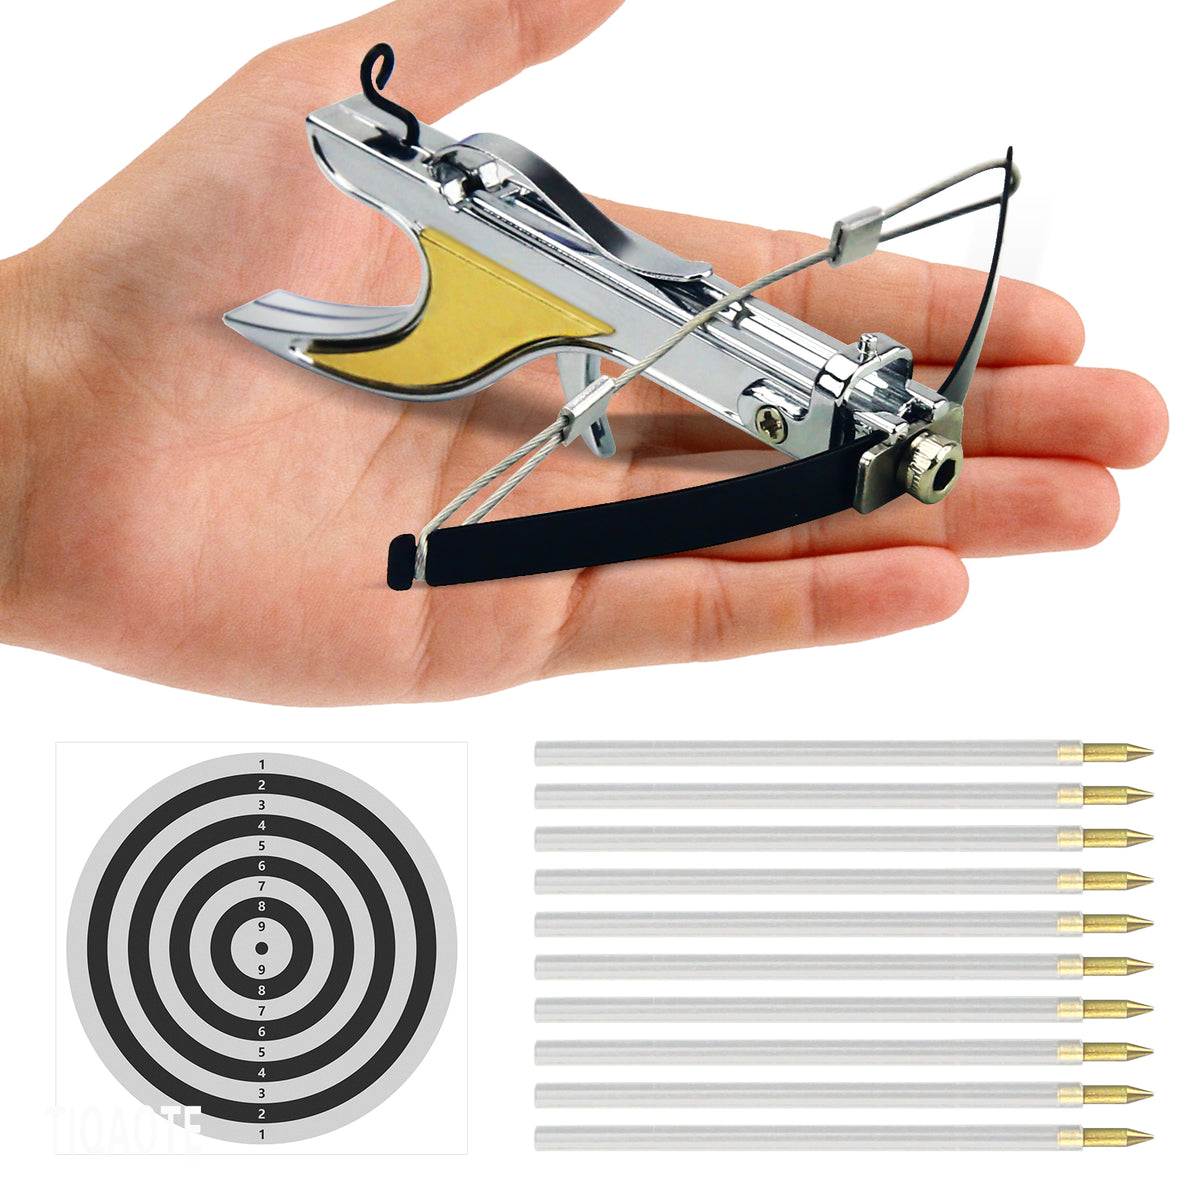 TIQAOTE Pocket Crossbow Mini Crossbow Model Bow and Arrow Hunting Outdoor Miniature Crossbow Art Craft Collectible for Adult